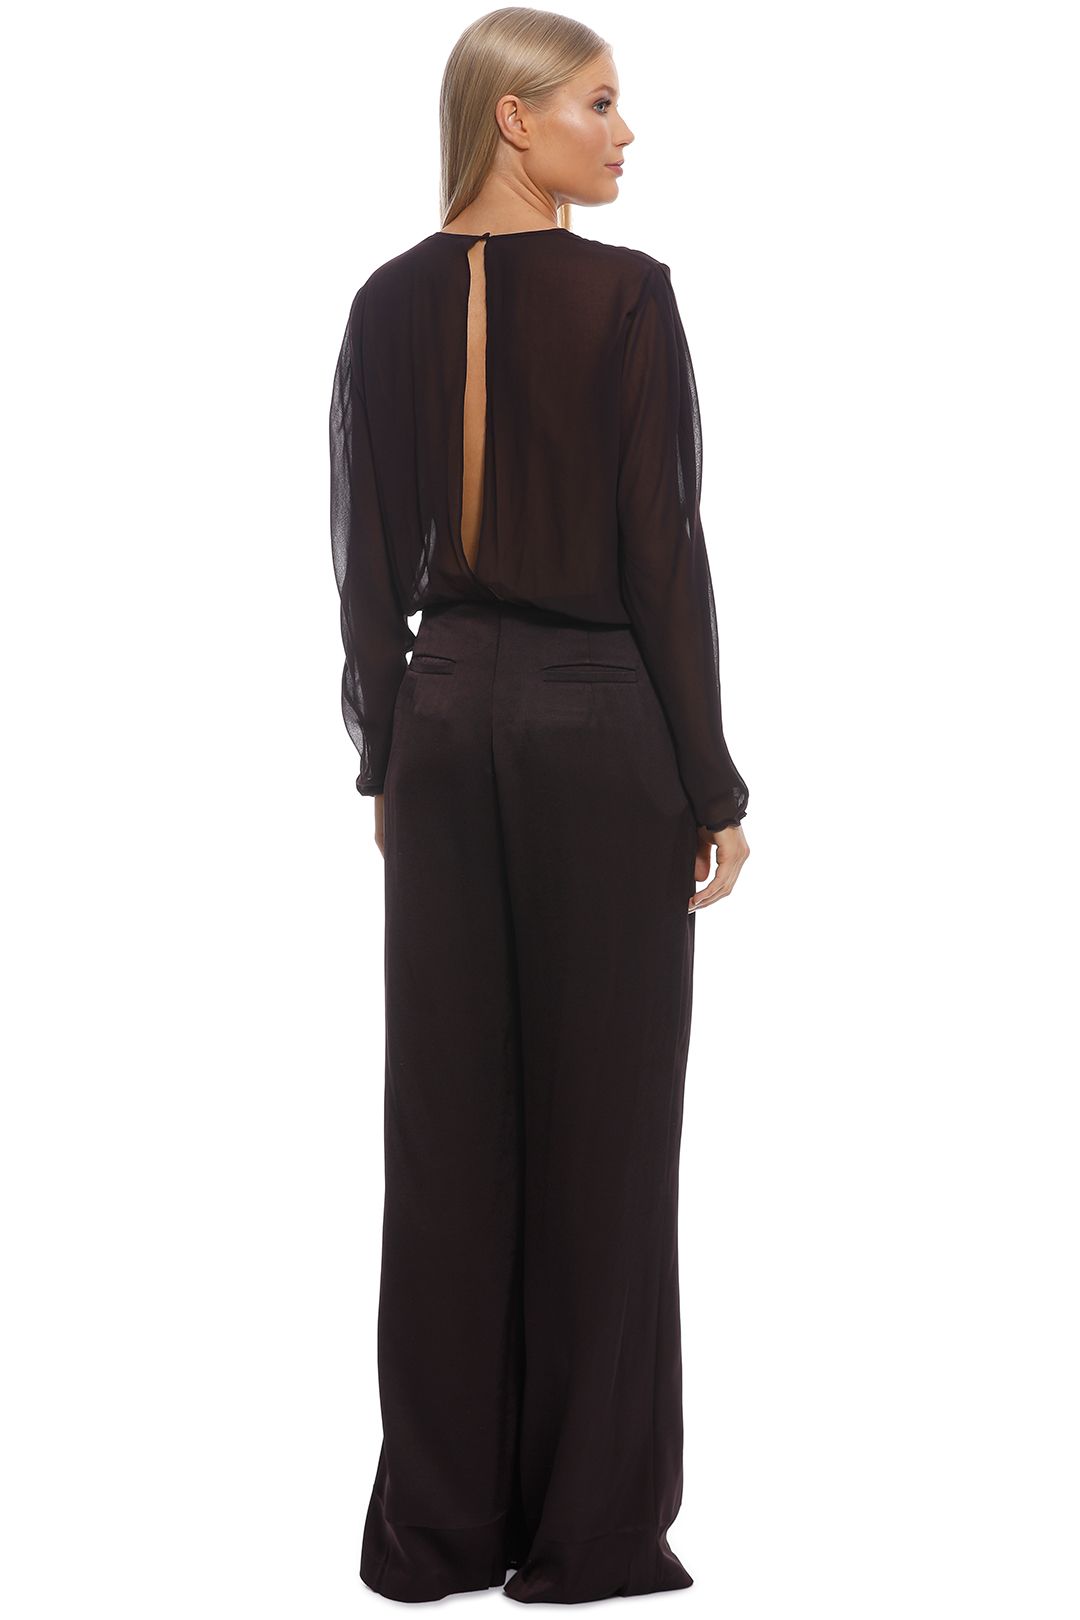 Camilla and Marc - Henderson Jumpsuit - Black - Back